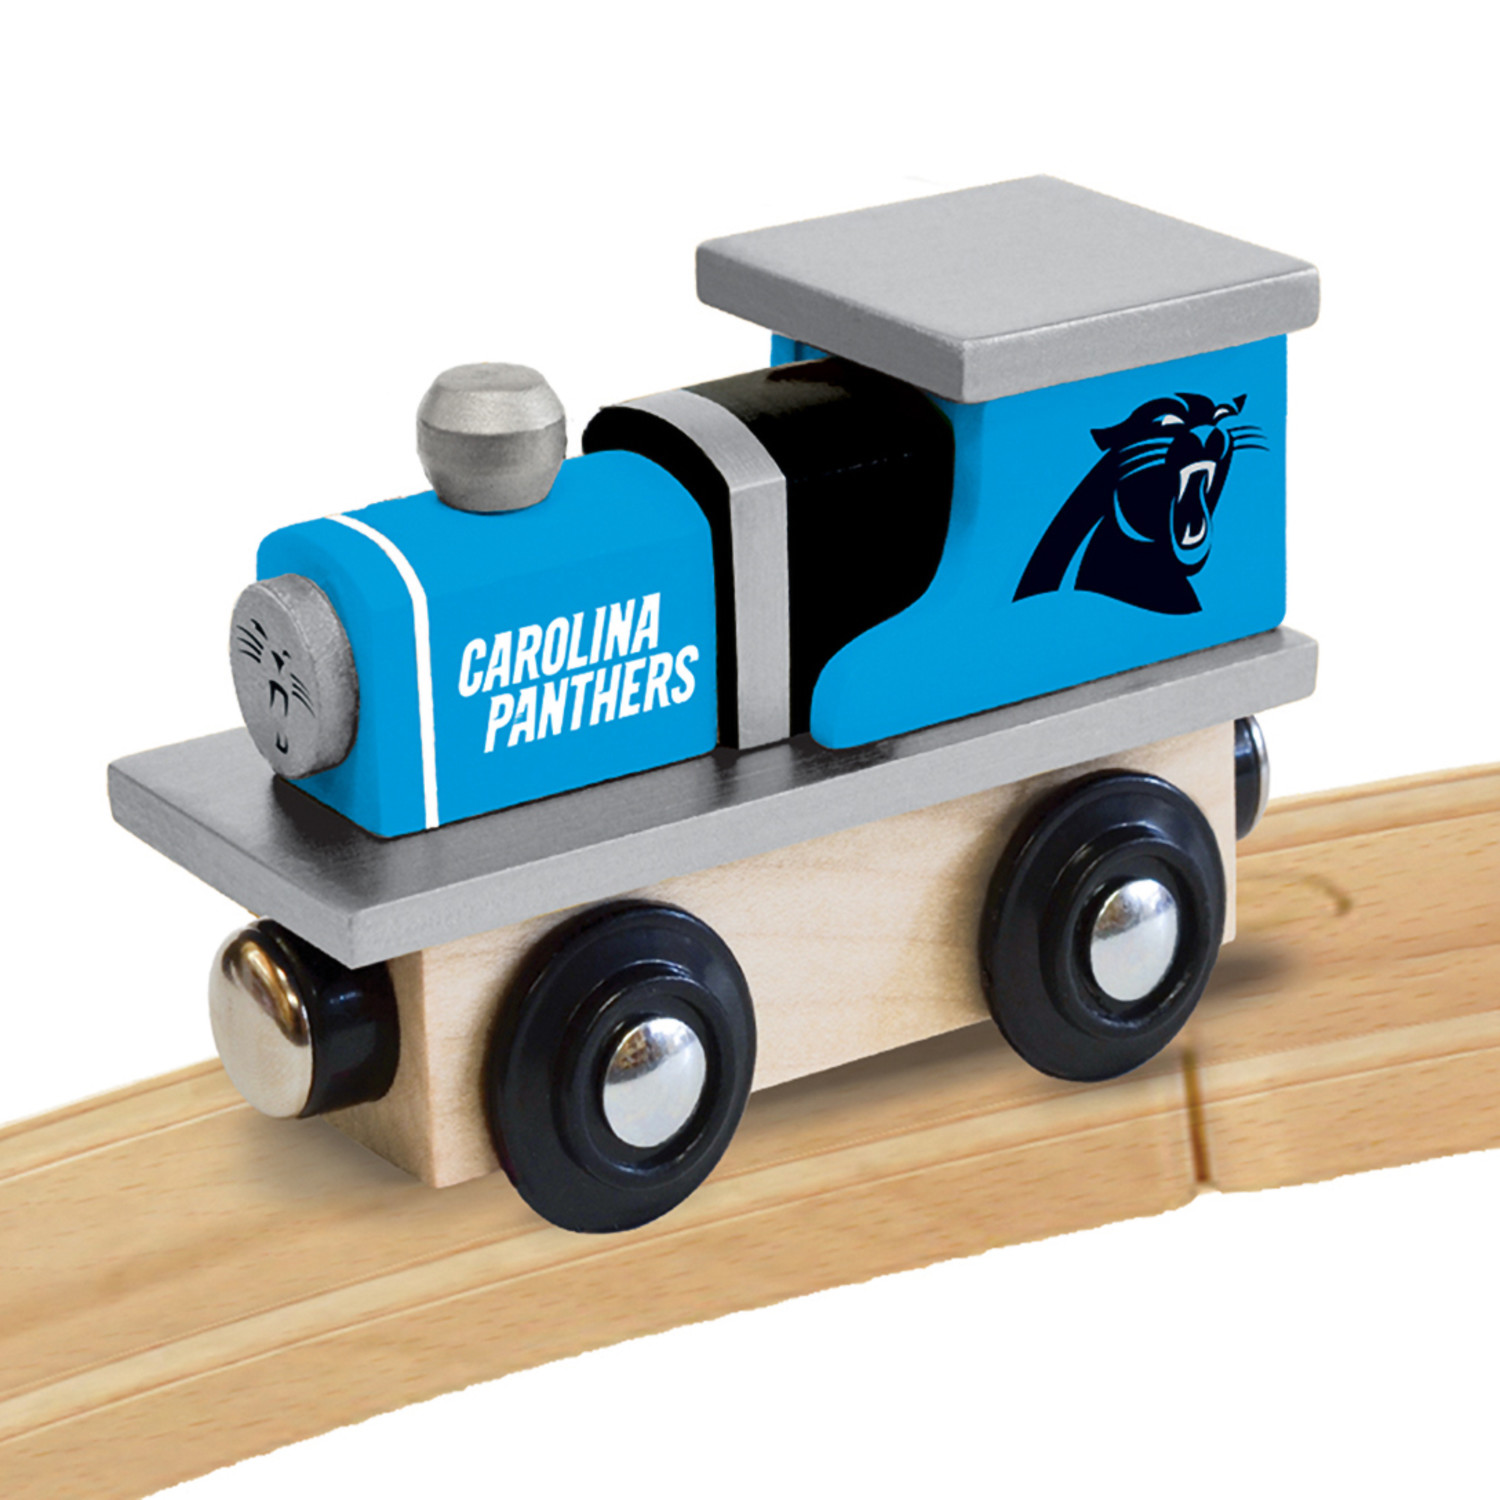 MasterPieces Officially Licensed NFL Carolina Panthers Wooden Toy Train Engine For Kids - image 4 of 4